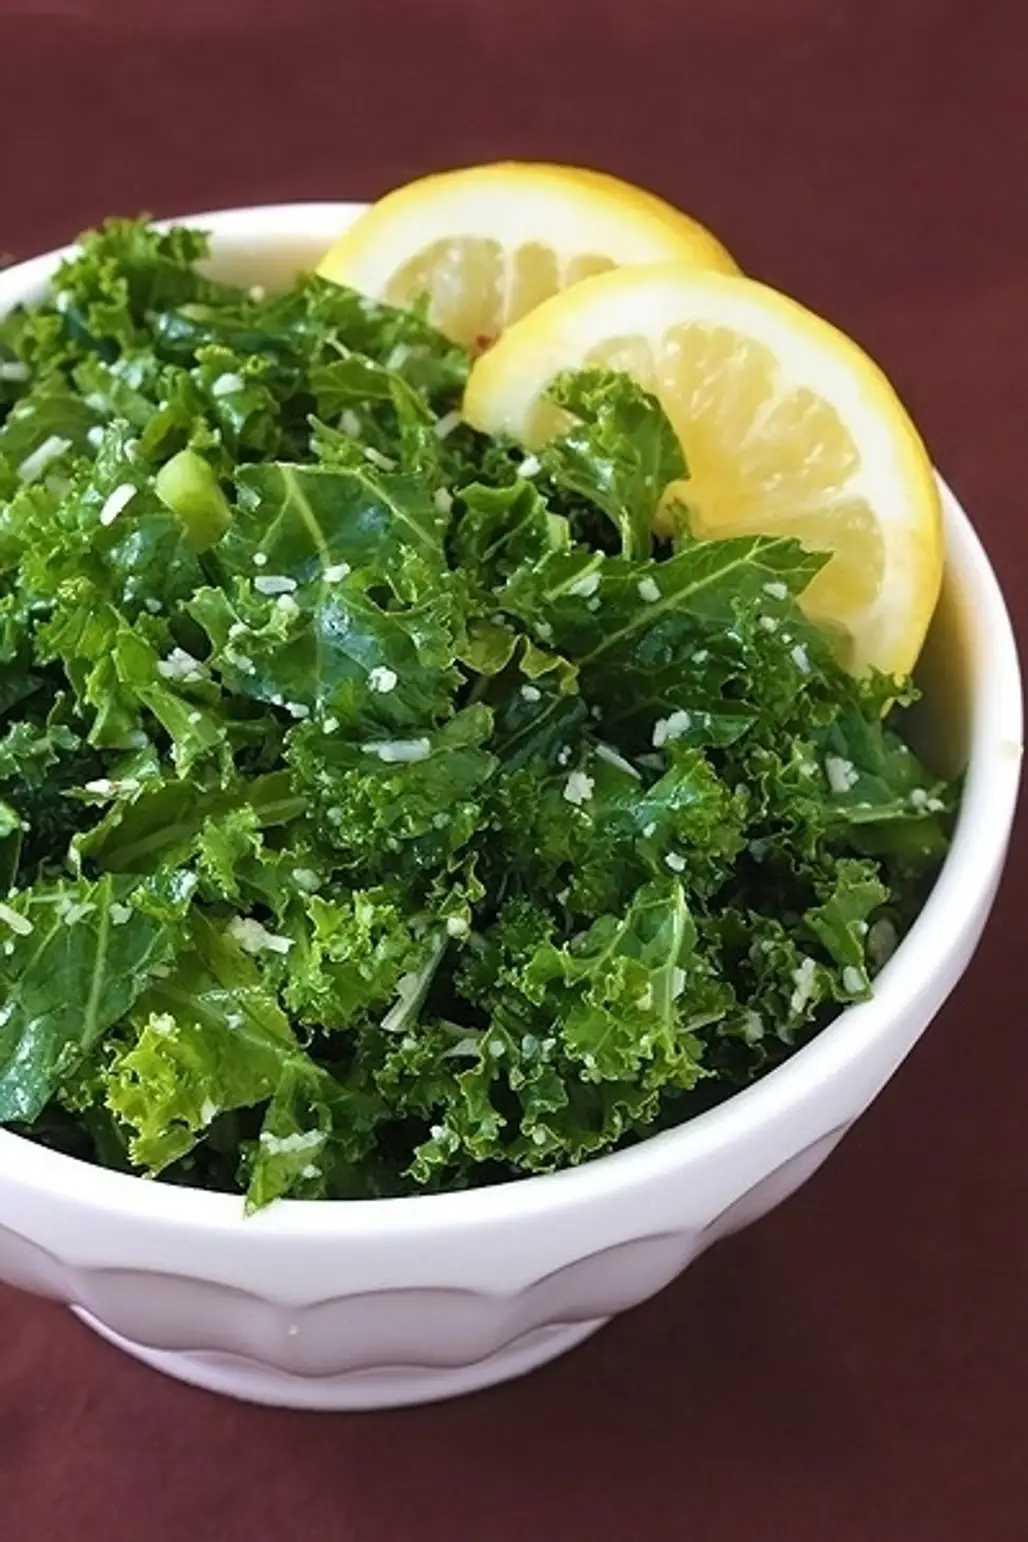 Wilted Chipotle Kale Salad with Chipotle Dressing